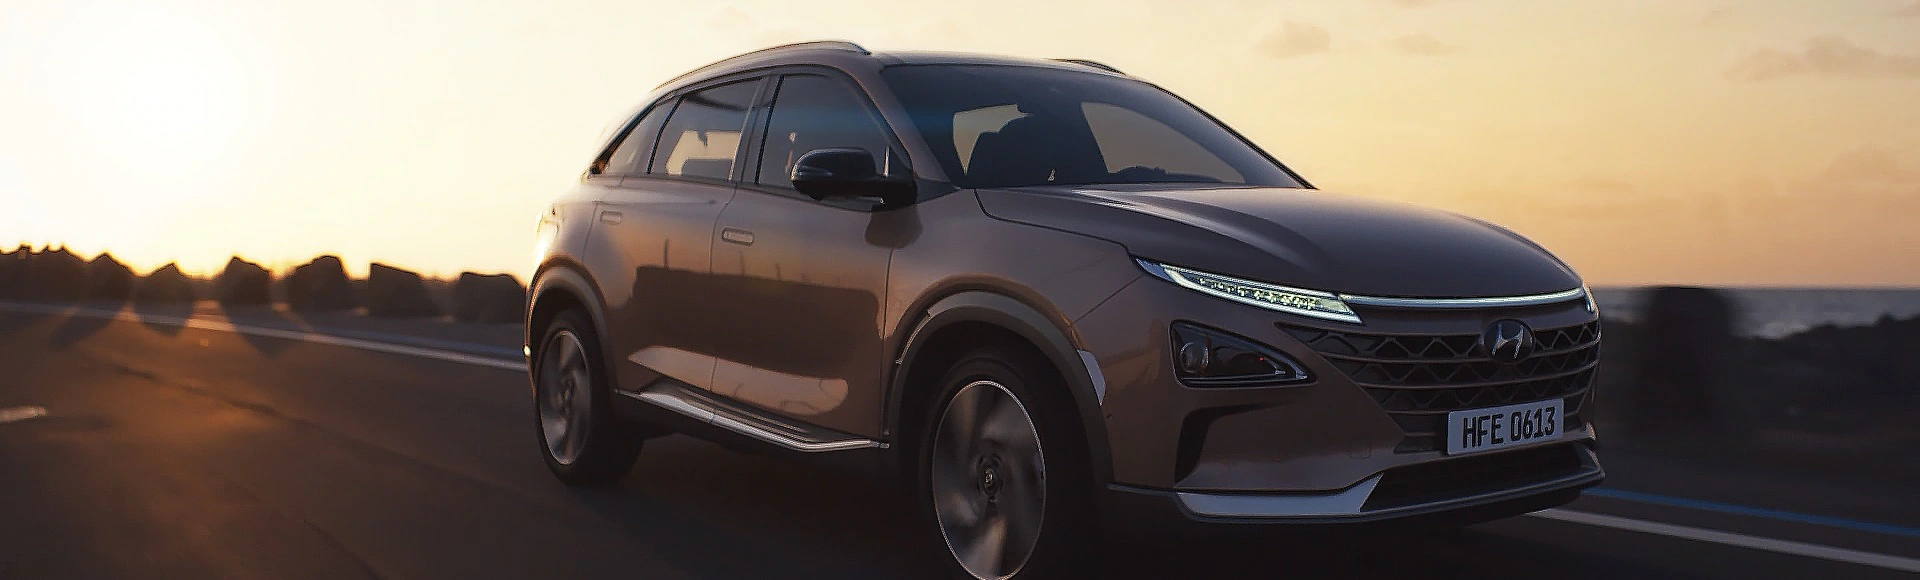 Hyundai NEXO,first FCEV vehicle for a sustainable future